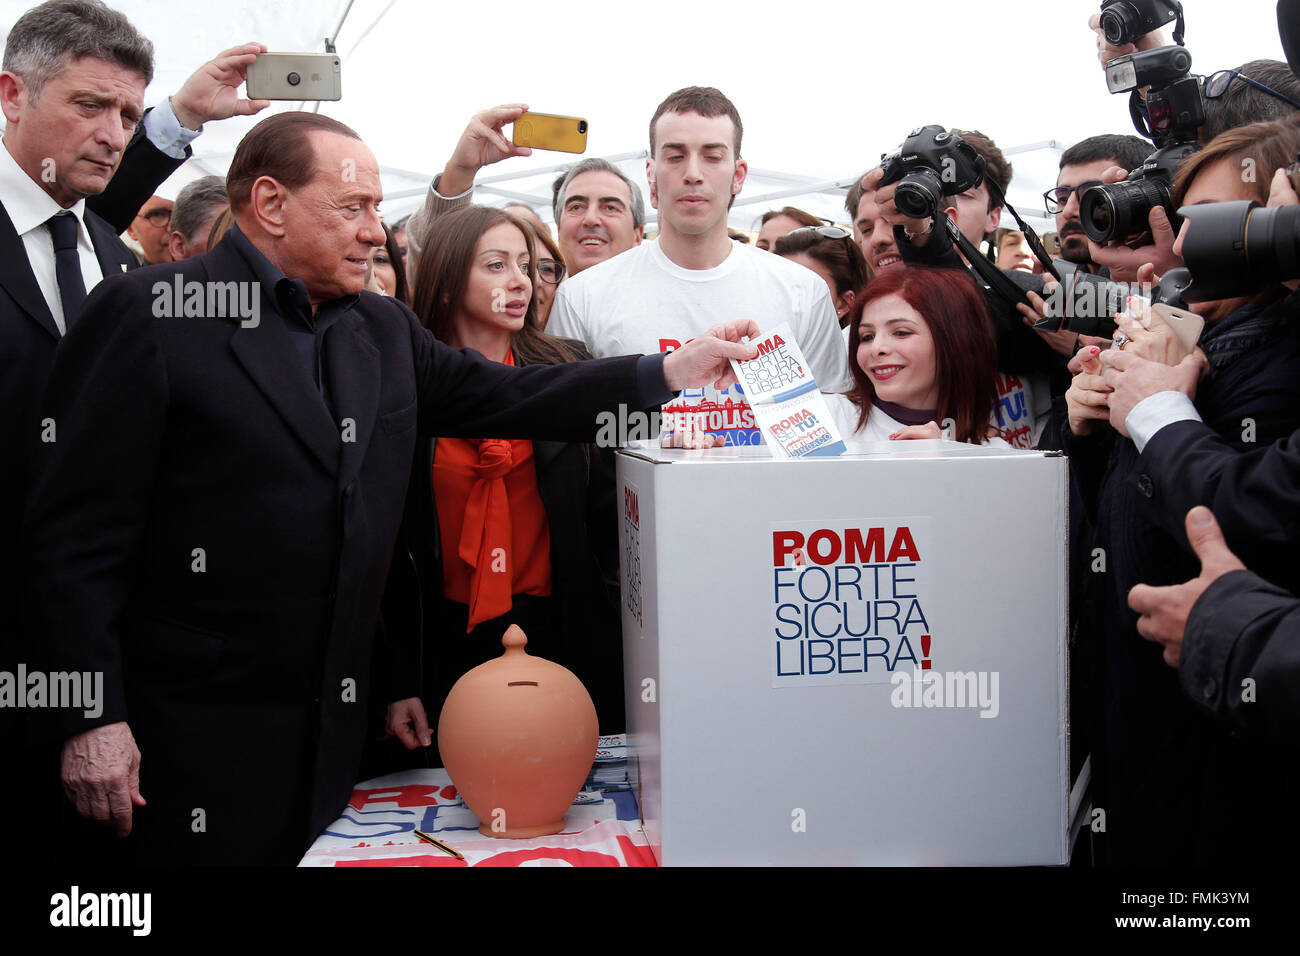 Rome, Italy. 12th Mar, 2016. Silvio Berlusconi votes at the Gazebo of Pantheon Rome 12th March 2016. Gazebo at Pantheon. Primary elections of the Centre-right party for the local elections of the Mayor of Rome. Photo Samantha Zucchi © Insidefoto/Alamy Live News Credit:  Insidefoto/Alamy Live News Stock Photo